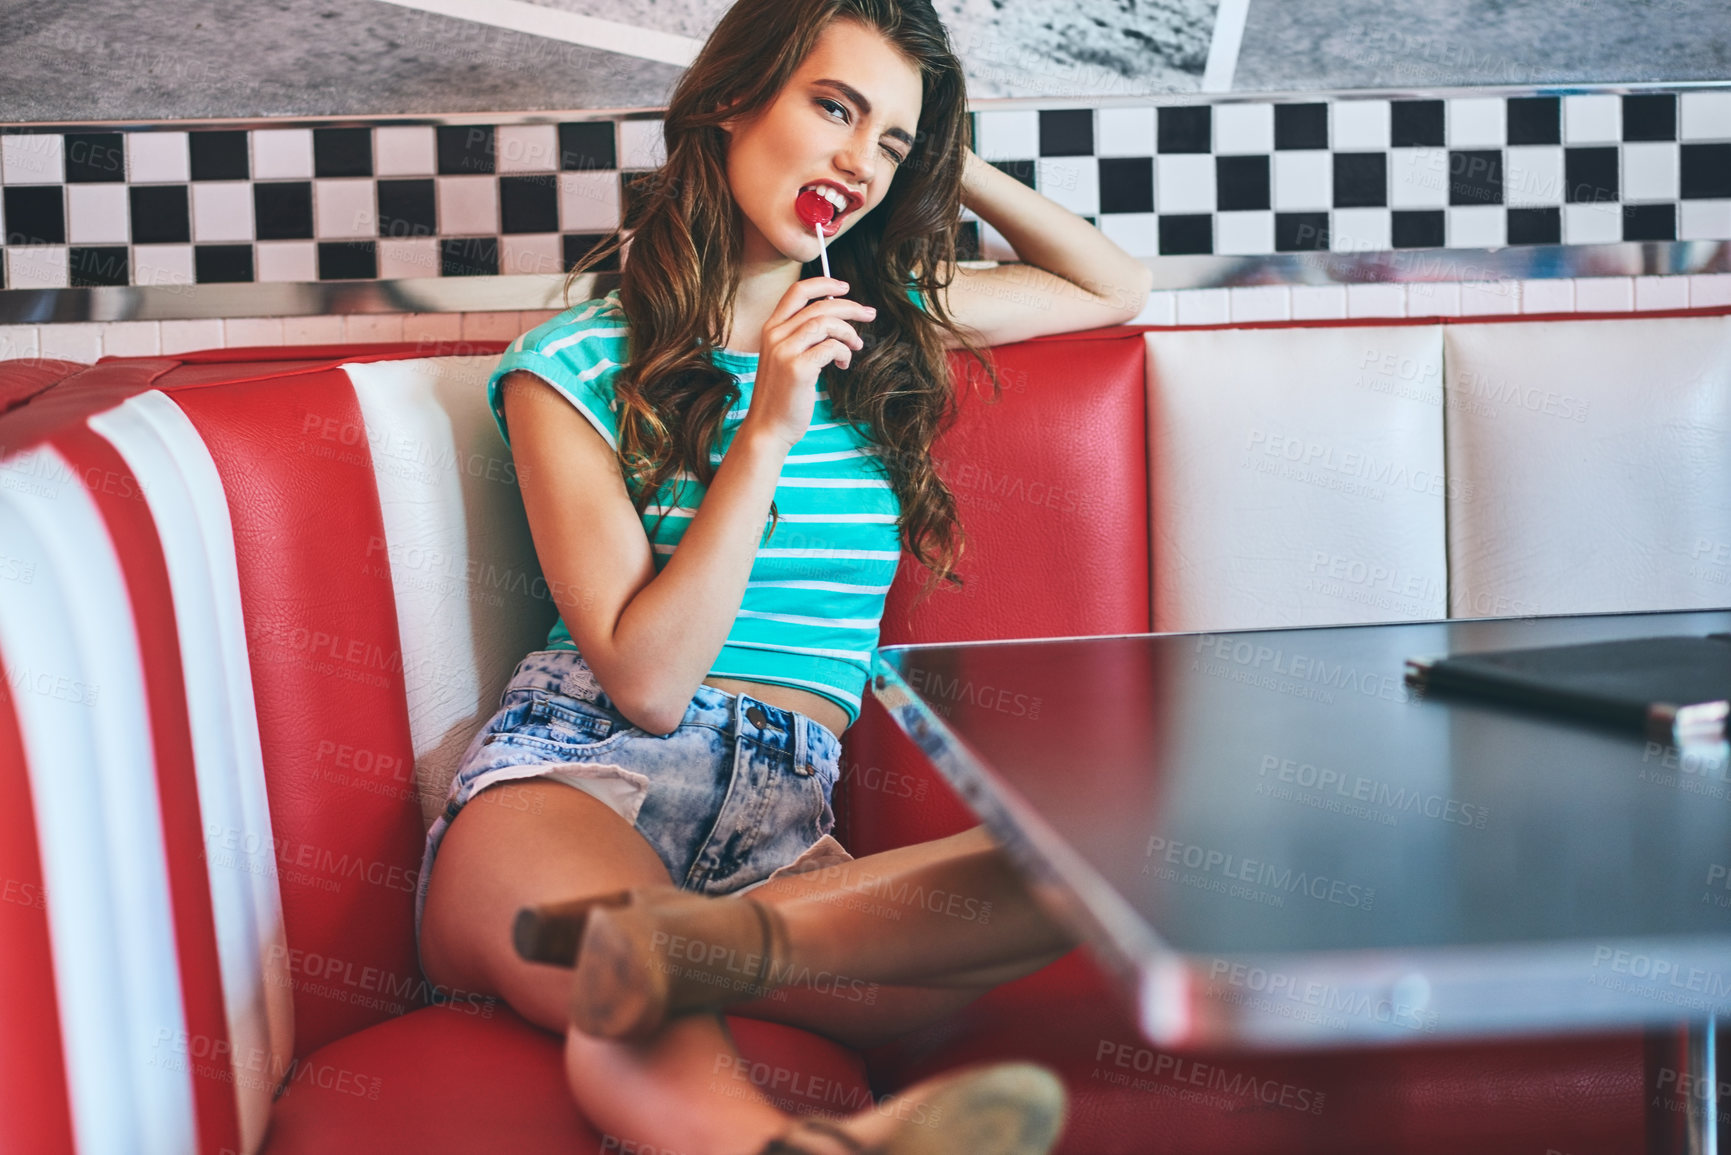 Buy stock photo Shot of a beautiful young woman in a diner